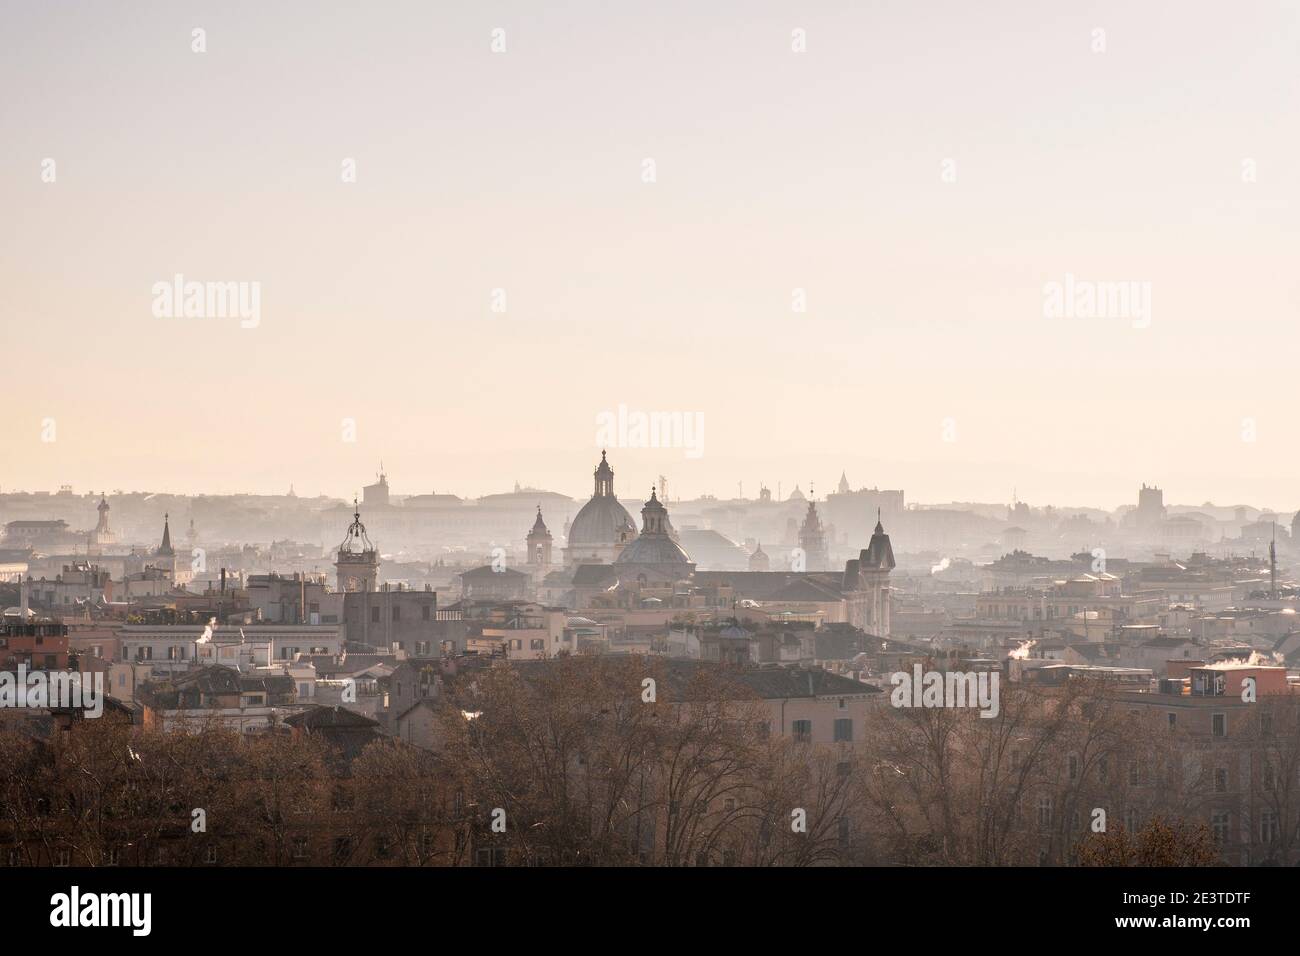 Atmospheric view down onto the misty outlines of domes, churches, landmark buildings and rooftops of central Rome, Italy, from Trastevere, at sunrise Stock Photo